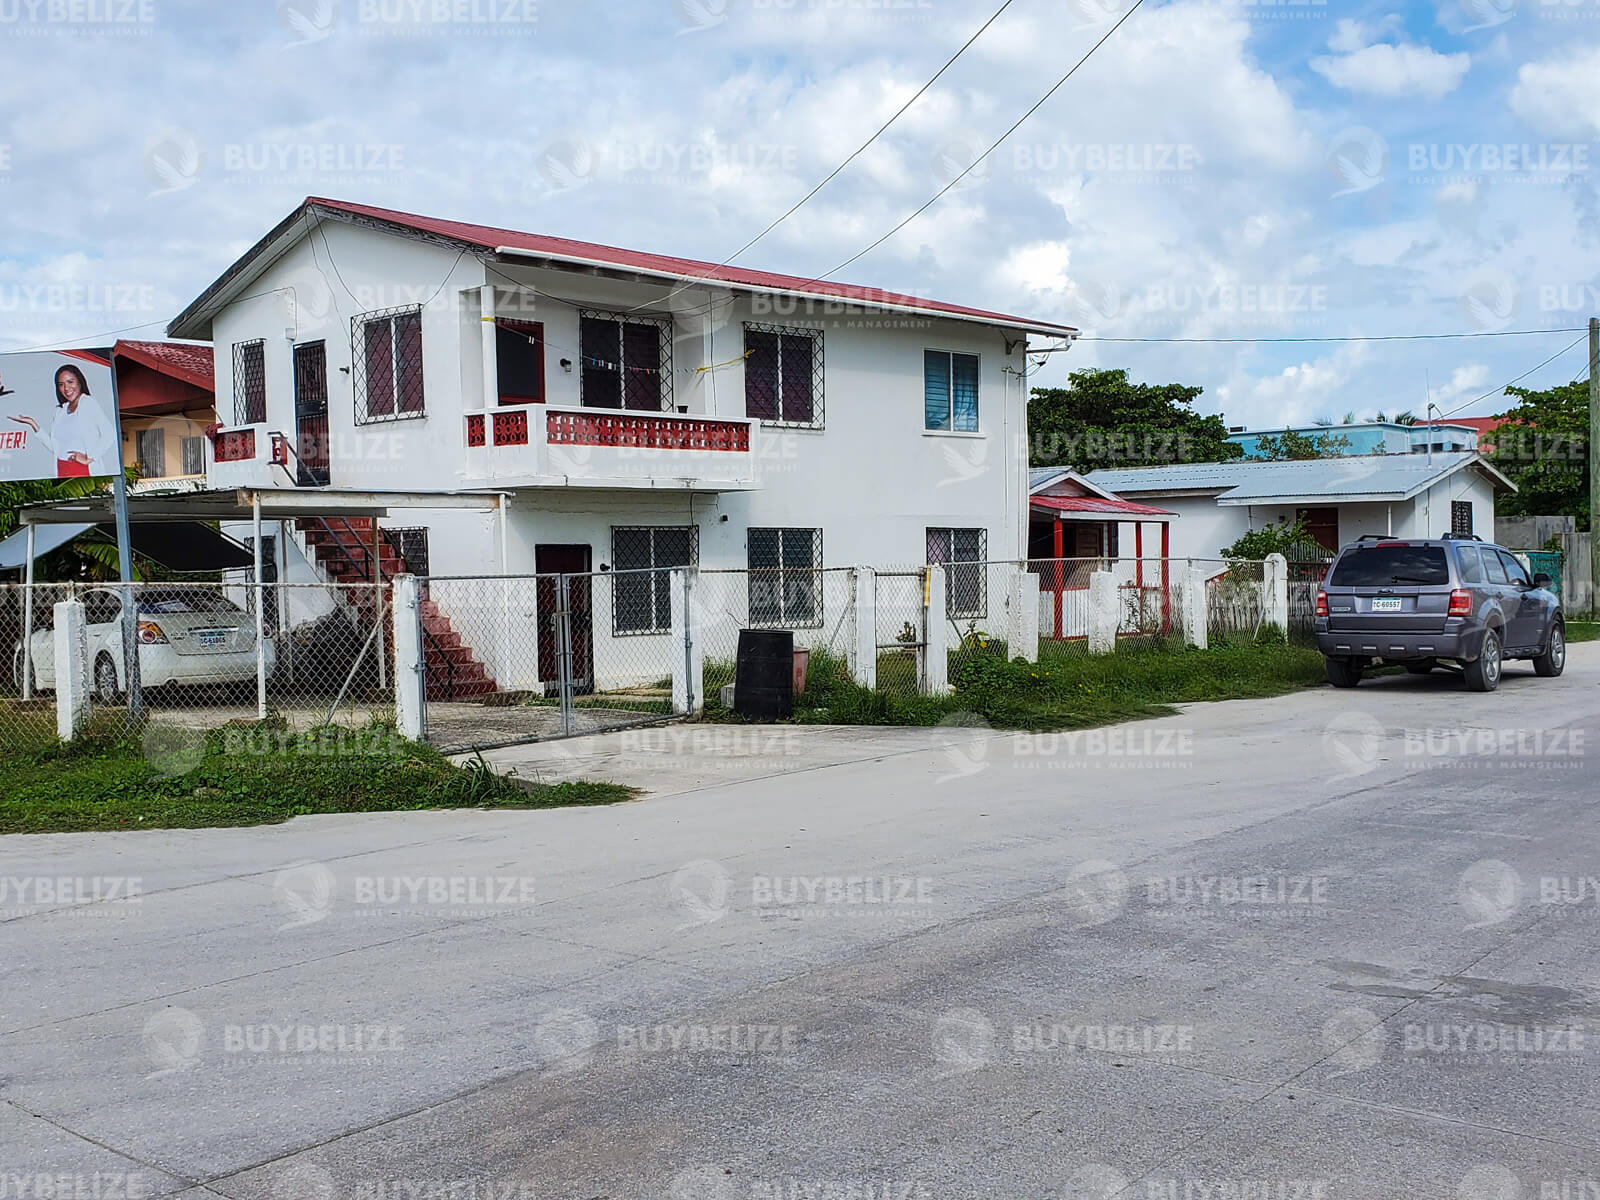 3 Bed 1 Bath ground residence for rent in Buttonwood Bay, Belize.